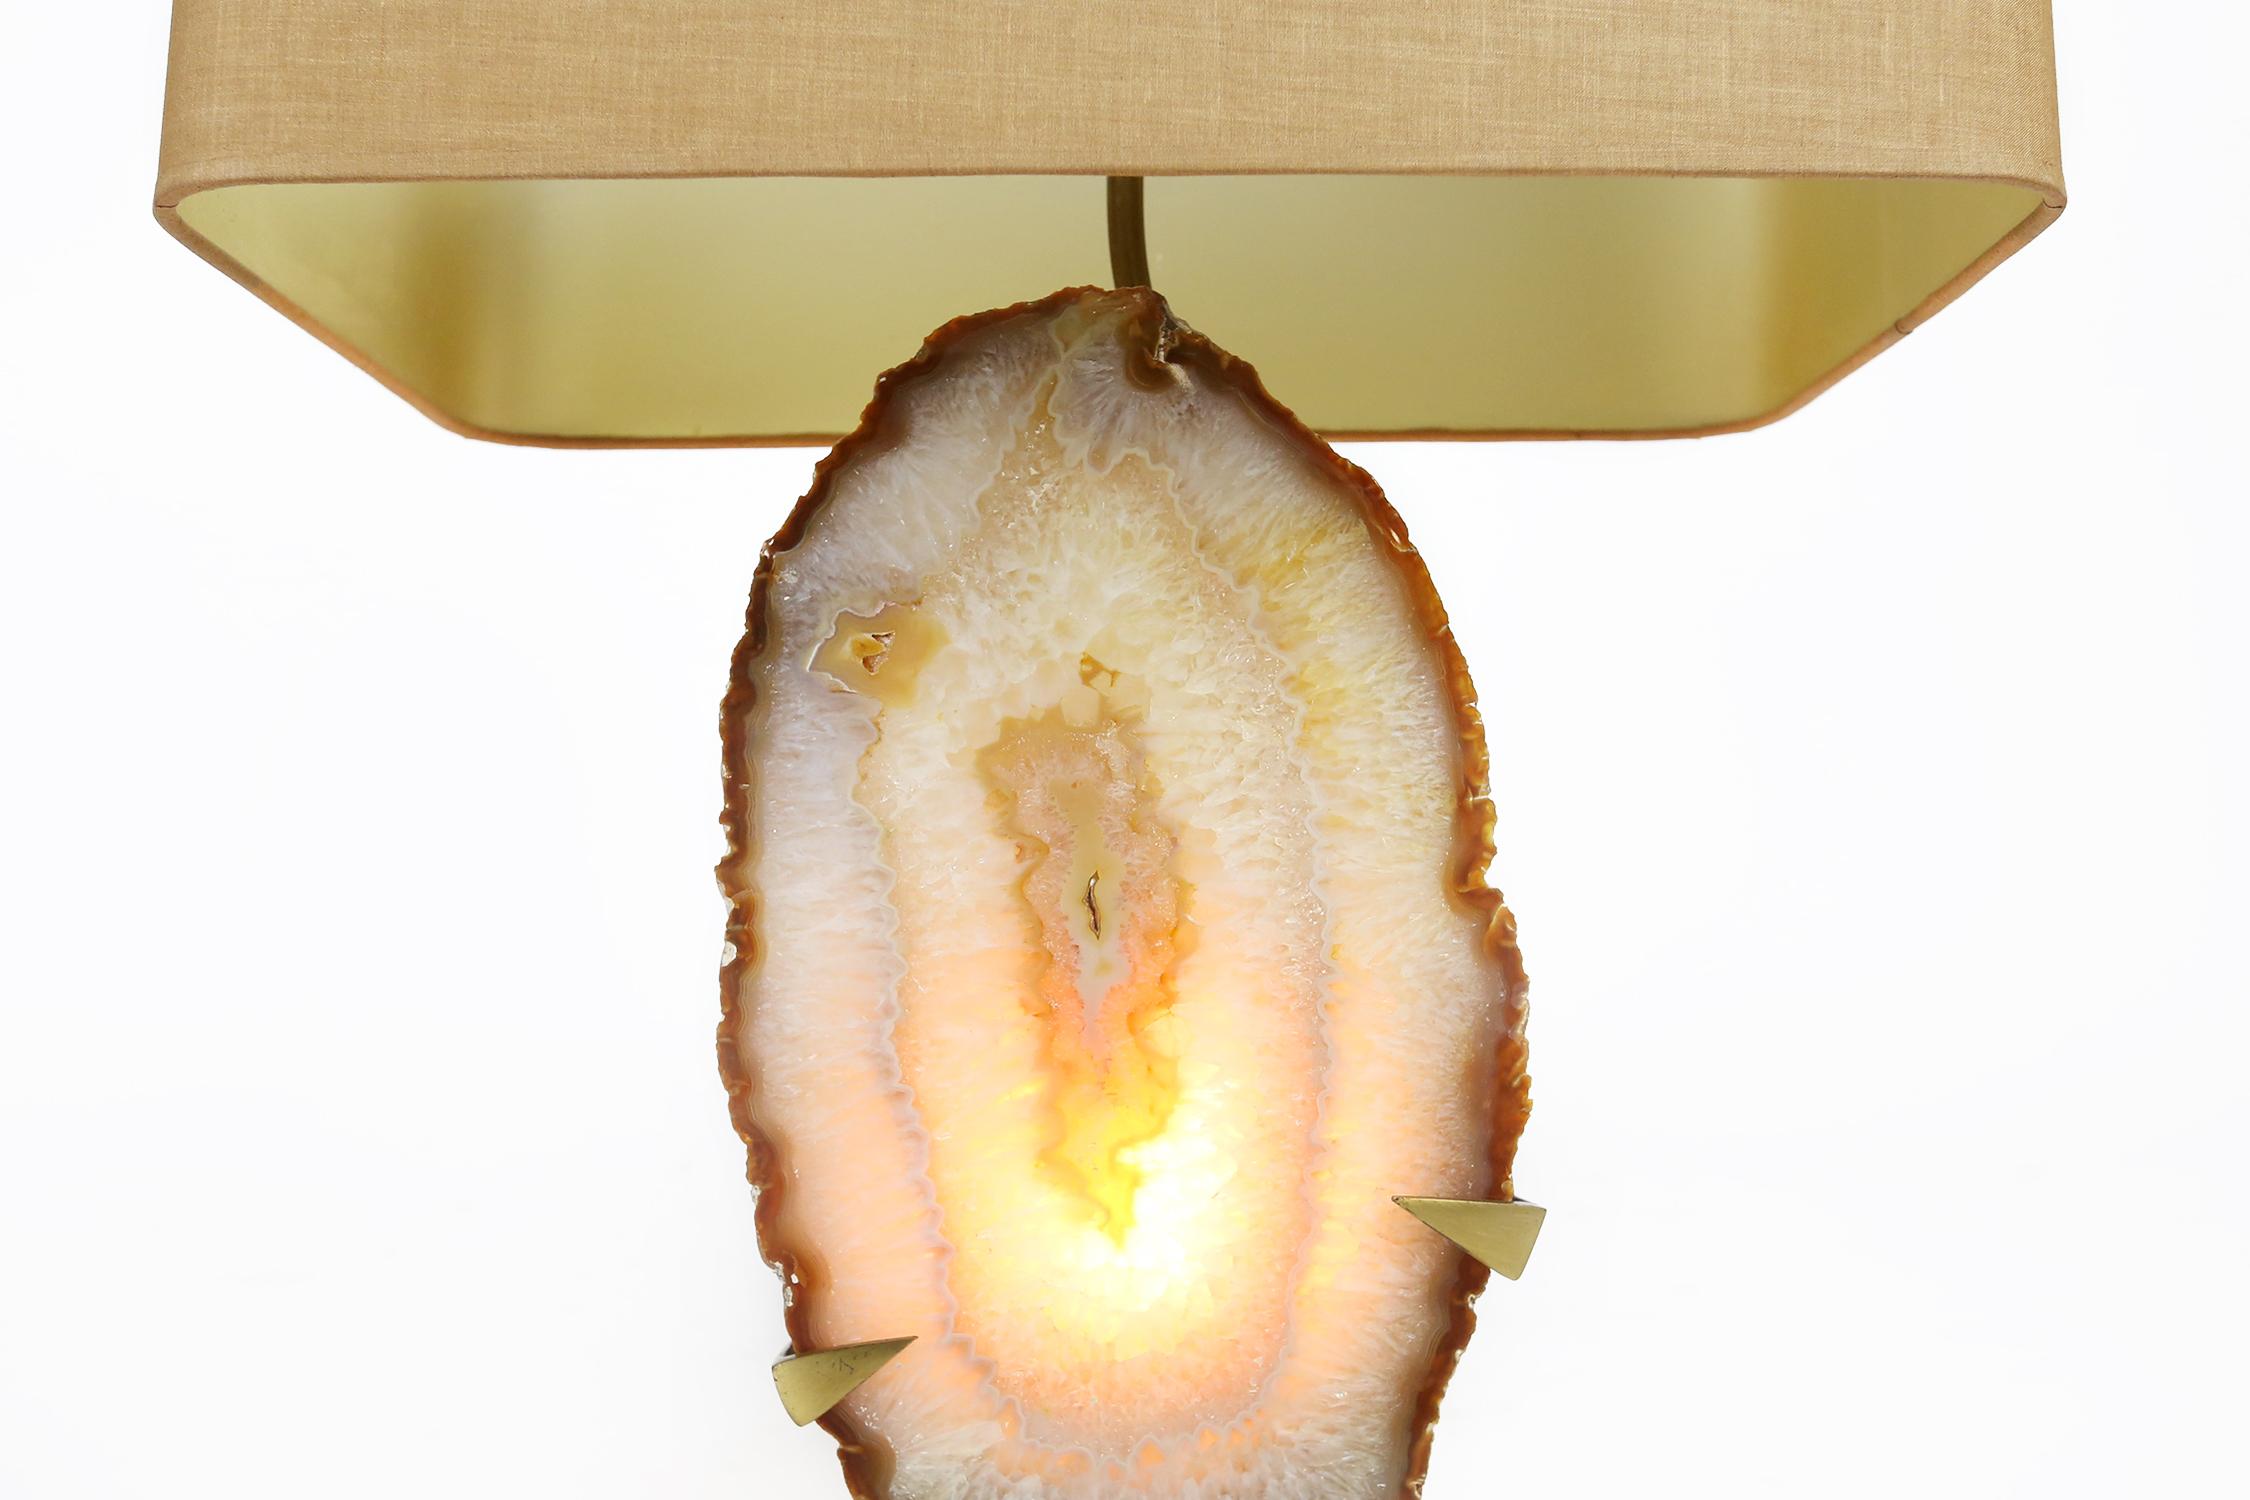 This table lamp was designed by Willy Daro in the 1970s.
The brass base holds the beautiful mineral agate stone. It is a unique piece. The agate stone is illuminated on the back. The agate measures H 32cm, L 19cm.
Inside of the original shape the